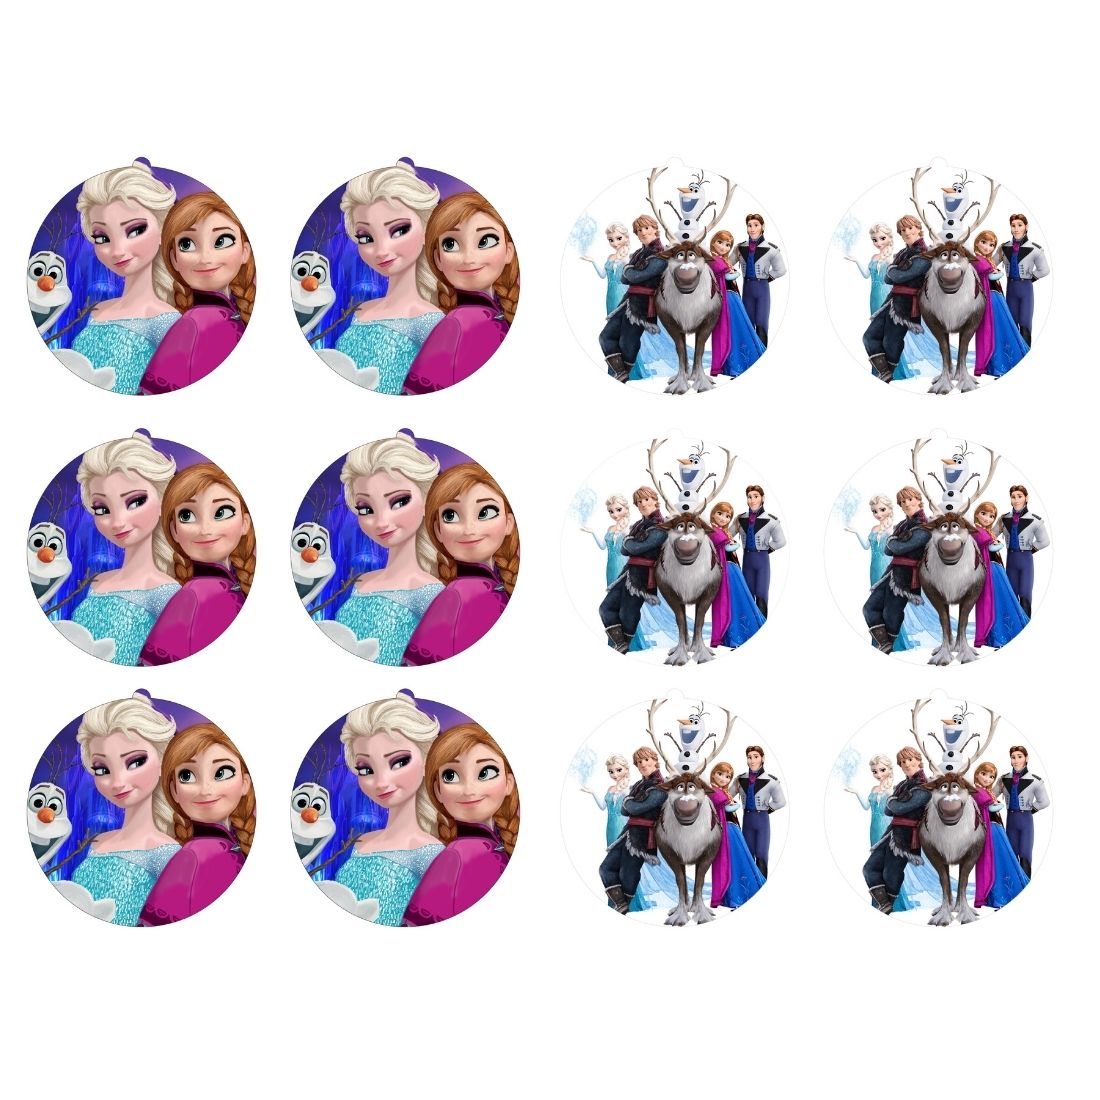 Frozen Princess Theme Hanging Danglers - Set of 6, Double-Sided Prints, 6 Inches Each with Hanging Ribbon